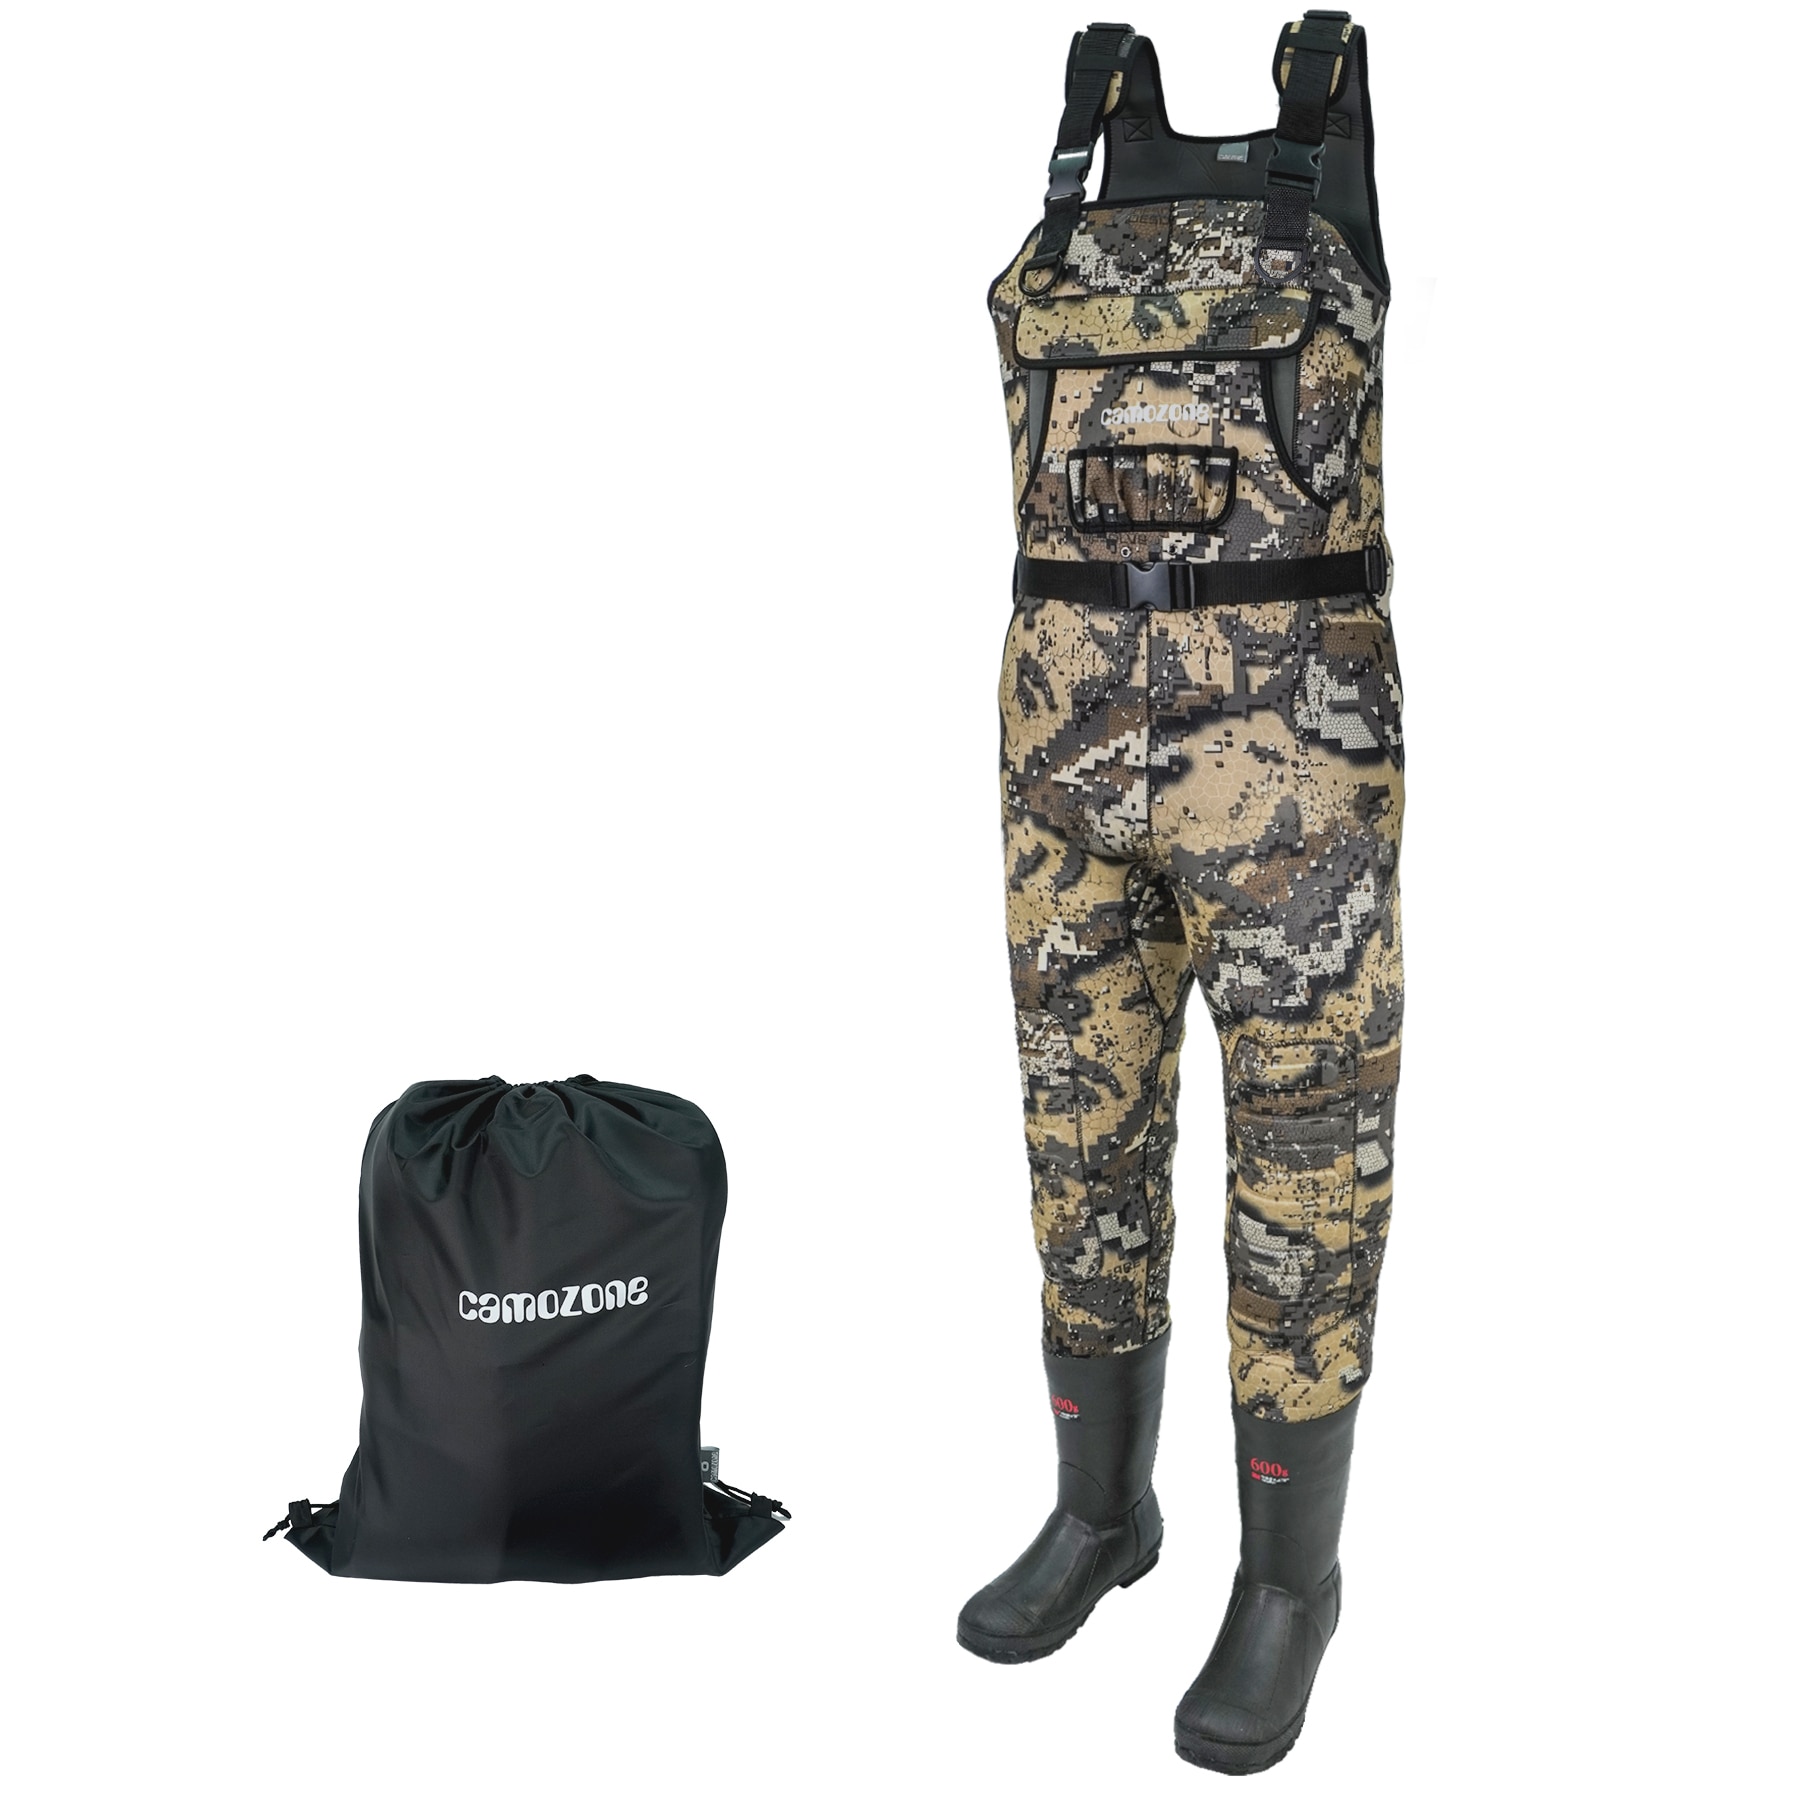 CAMOZONE Neoprene Chest Waders with Boots-size7 Unisex Fishing